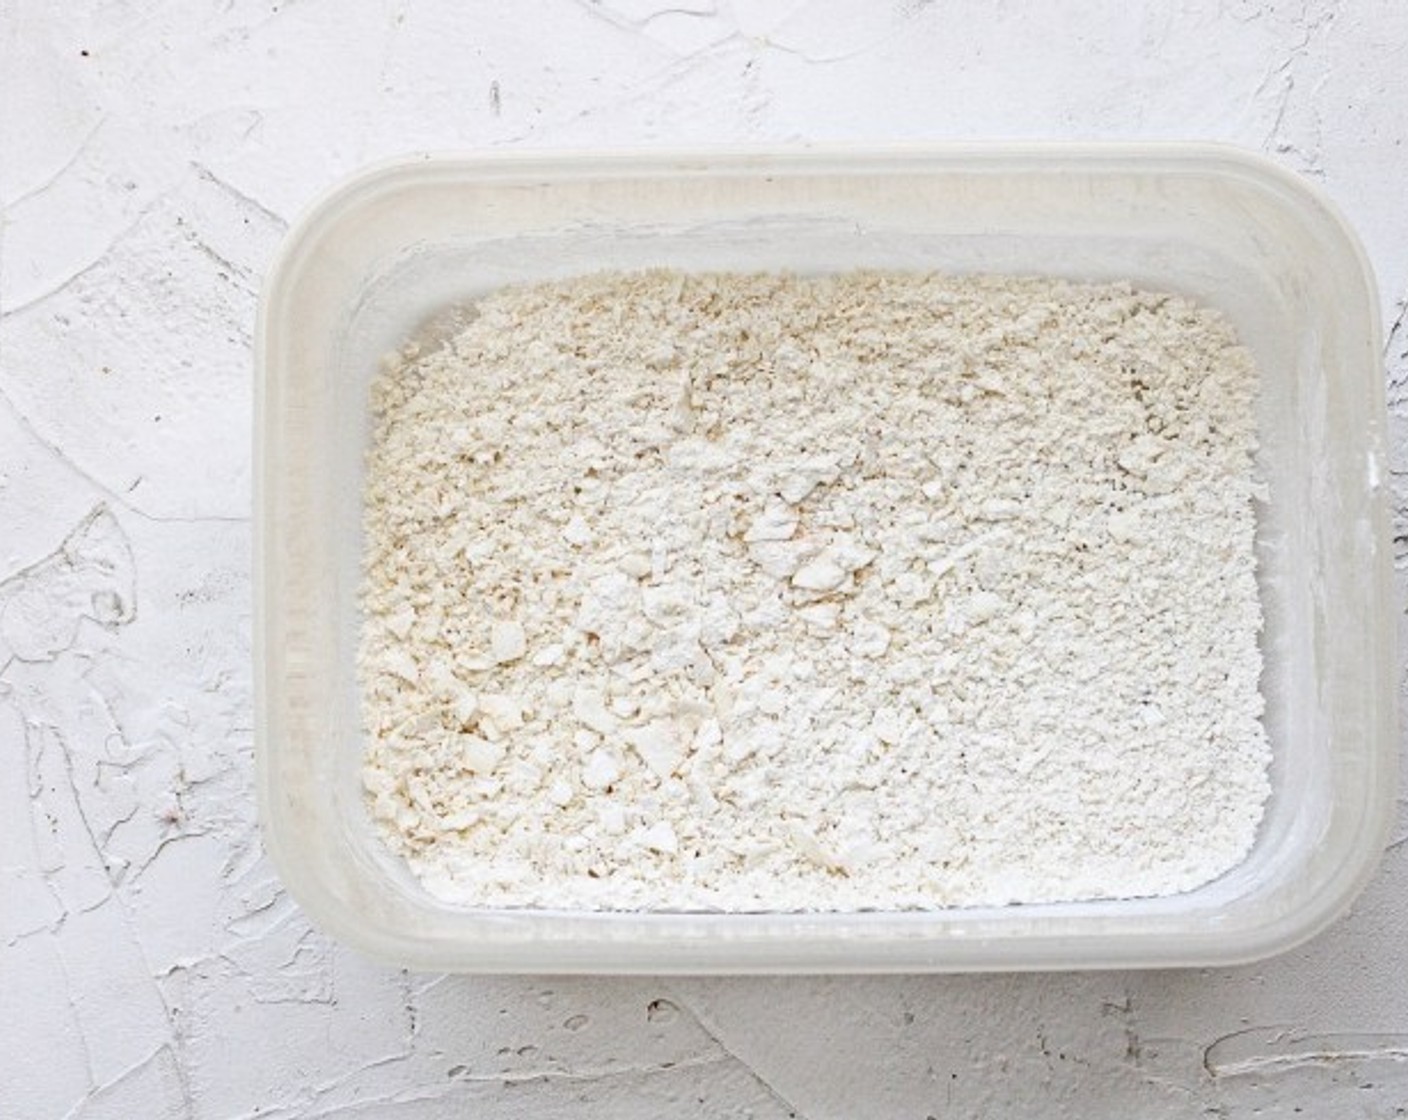 step 7 While the tofu is marinating, make your coconut crust. Combine the Unsweetened Shredded Coconut (1/2 cup), Panko Breadcrumbs (1/2 cup), and Corn Starch (1/4 cup) in a large bowl or Tupperware container with a lid.